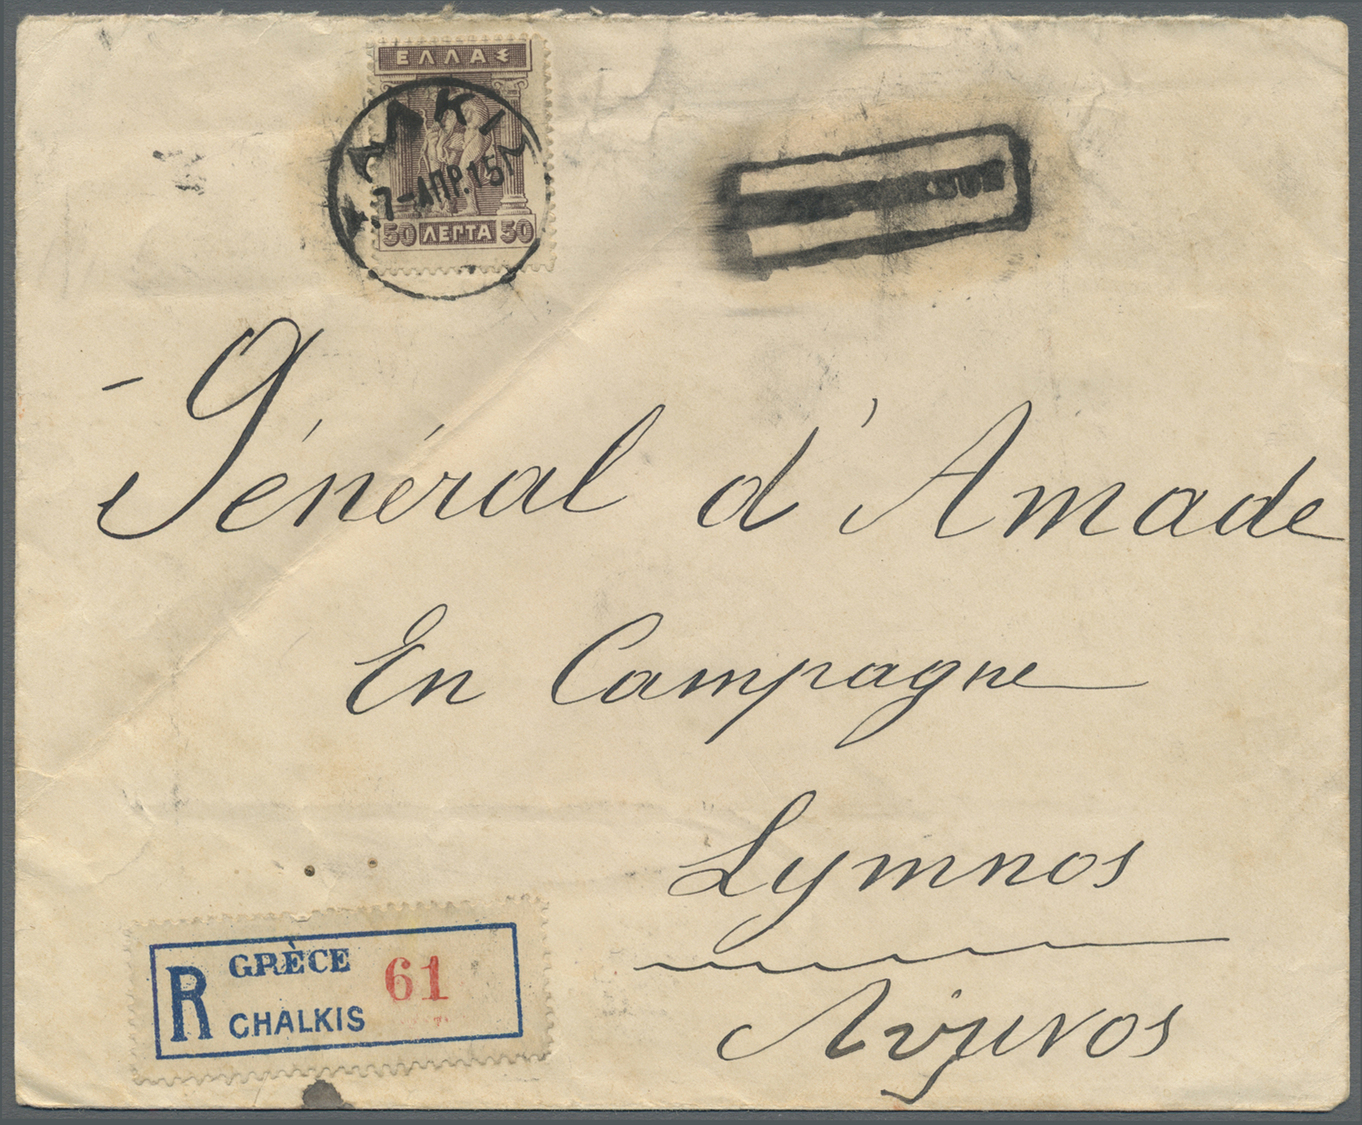 Br Griechenland: 1915. Registered Envelope (folds) Addressed To 'General D'Amade, En Campaign Lemnos' Bearing Yve - Covers & Documents